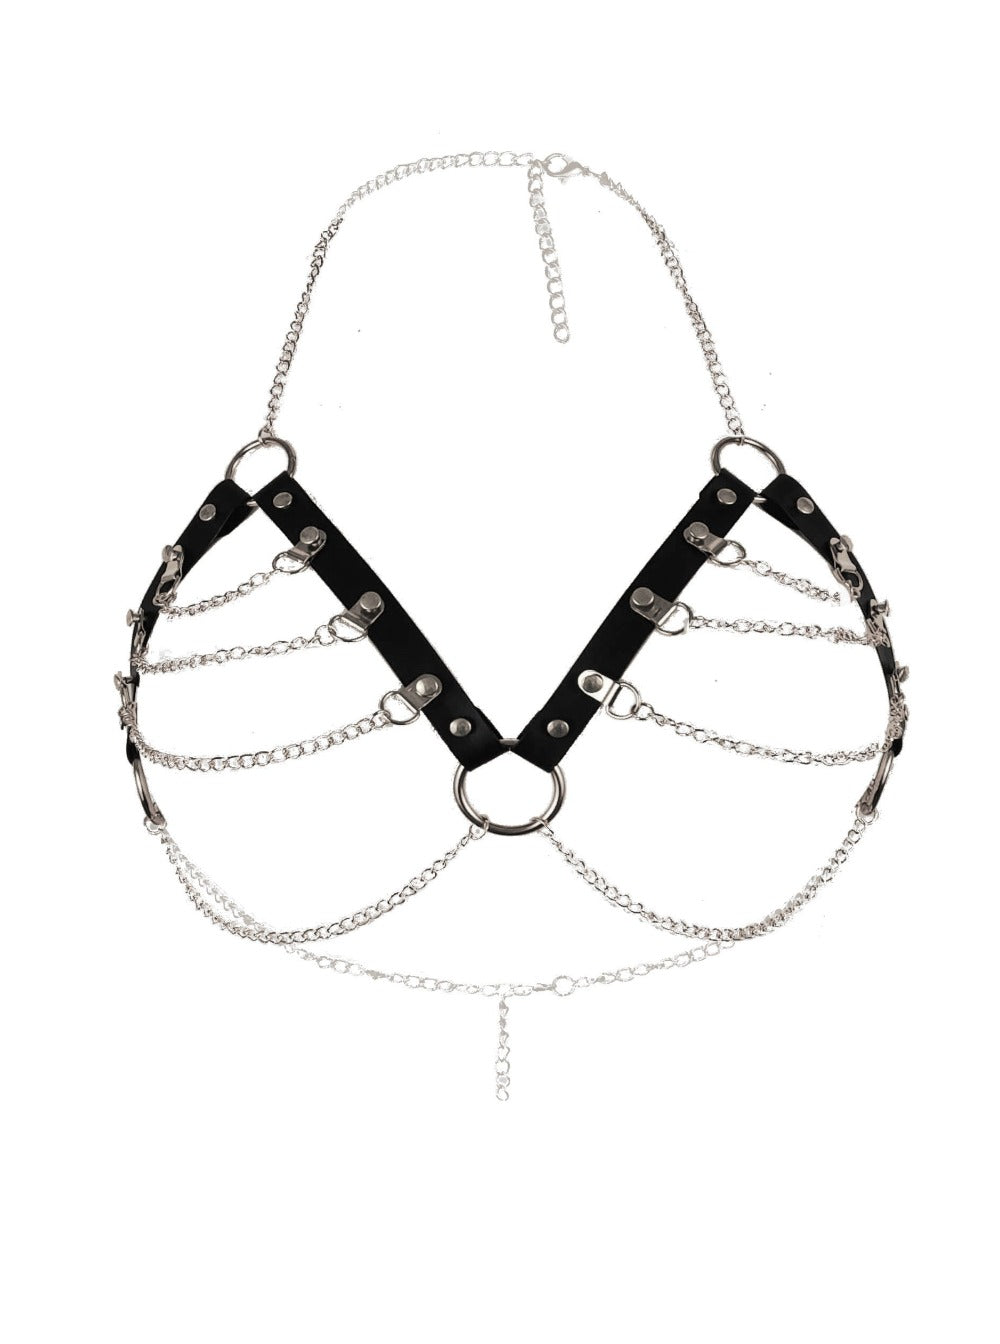 Leather Chest Harness with Chains No. 12